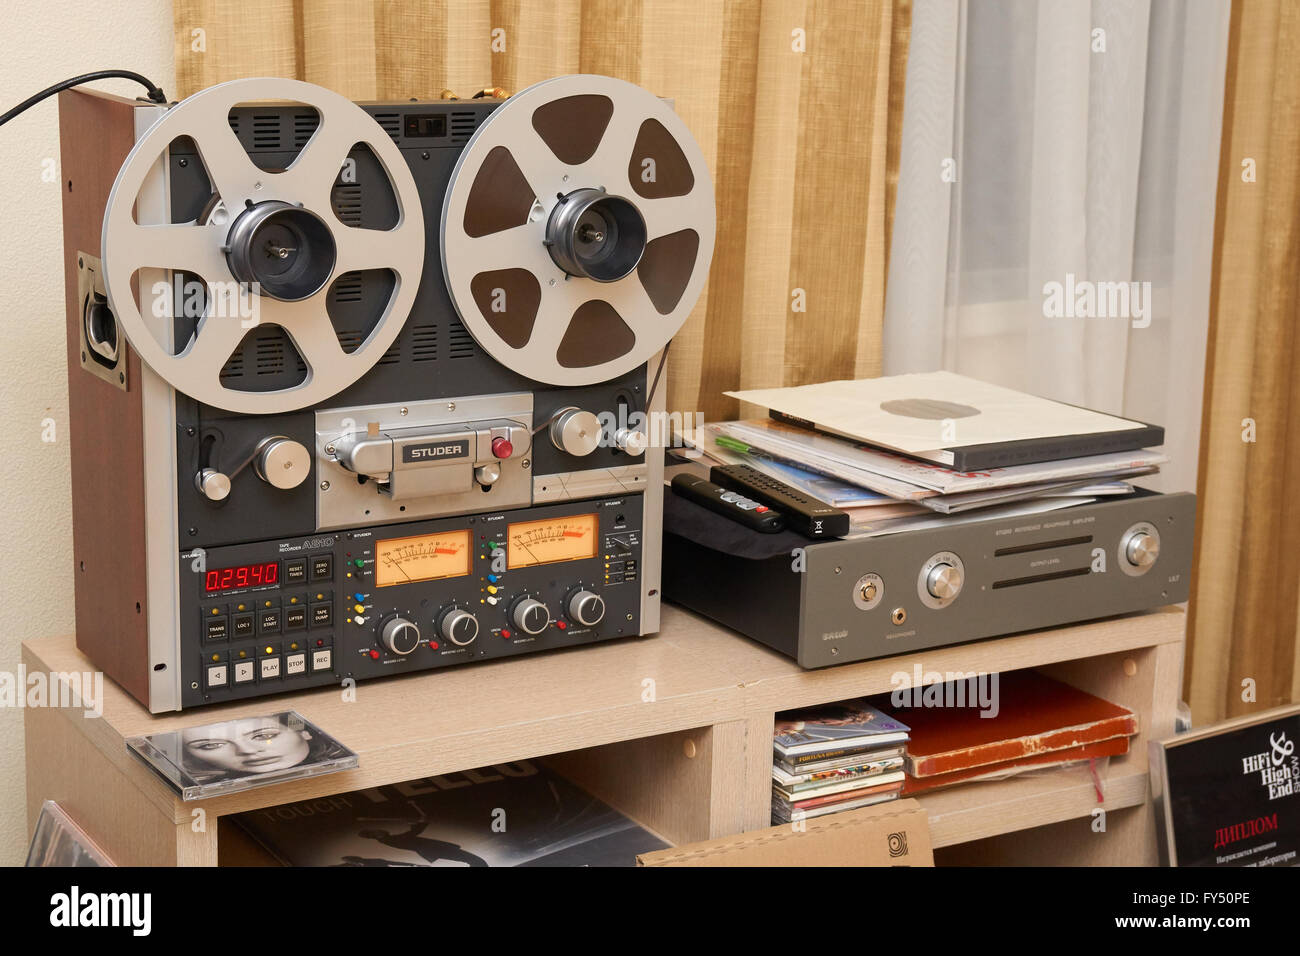 Moscow Hi Fi and High End Show, Moscow, Russia - April 15, 2016: Tape recorder on the table of the show room Stock Photo